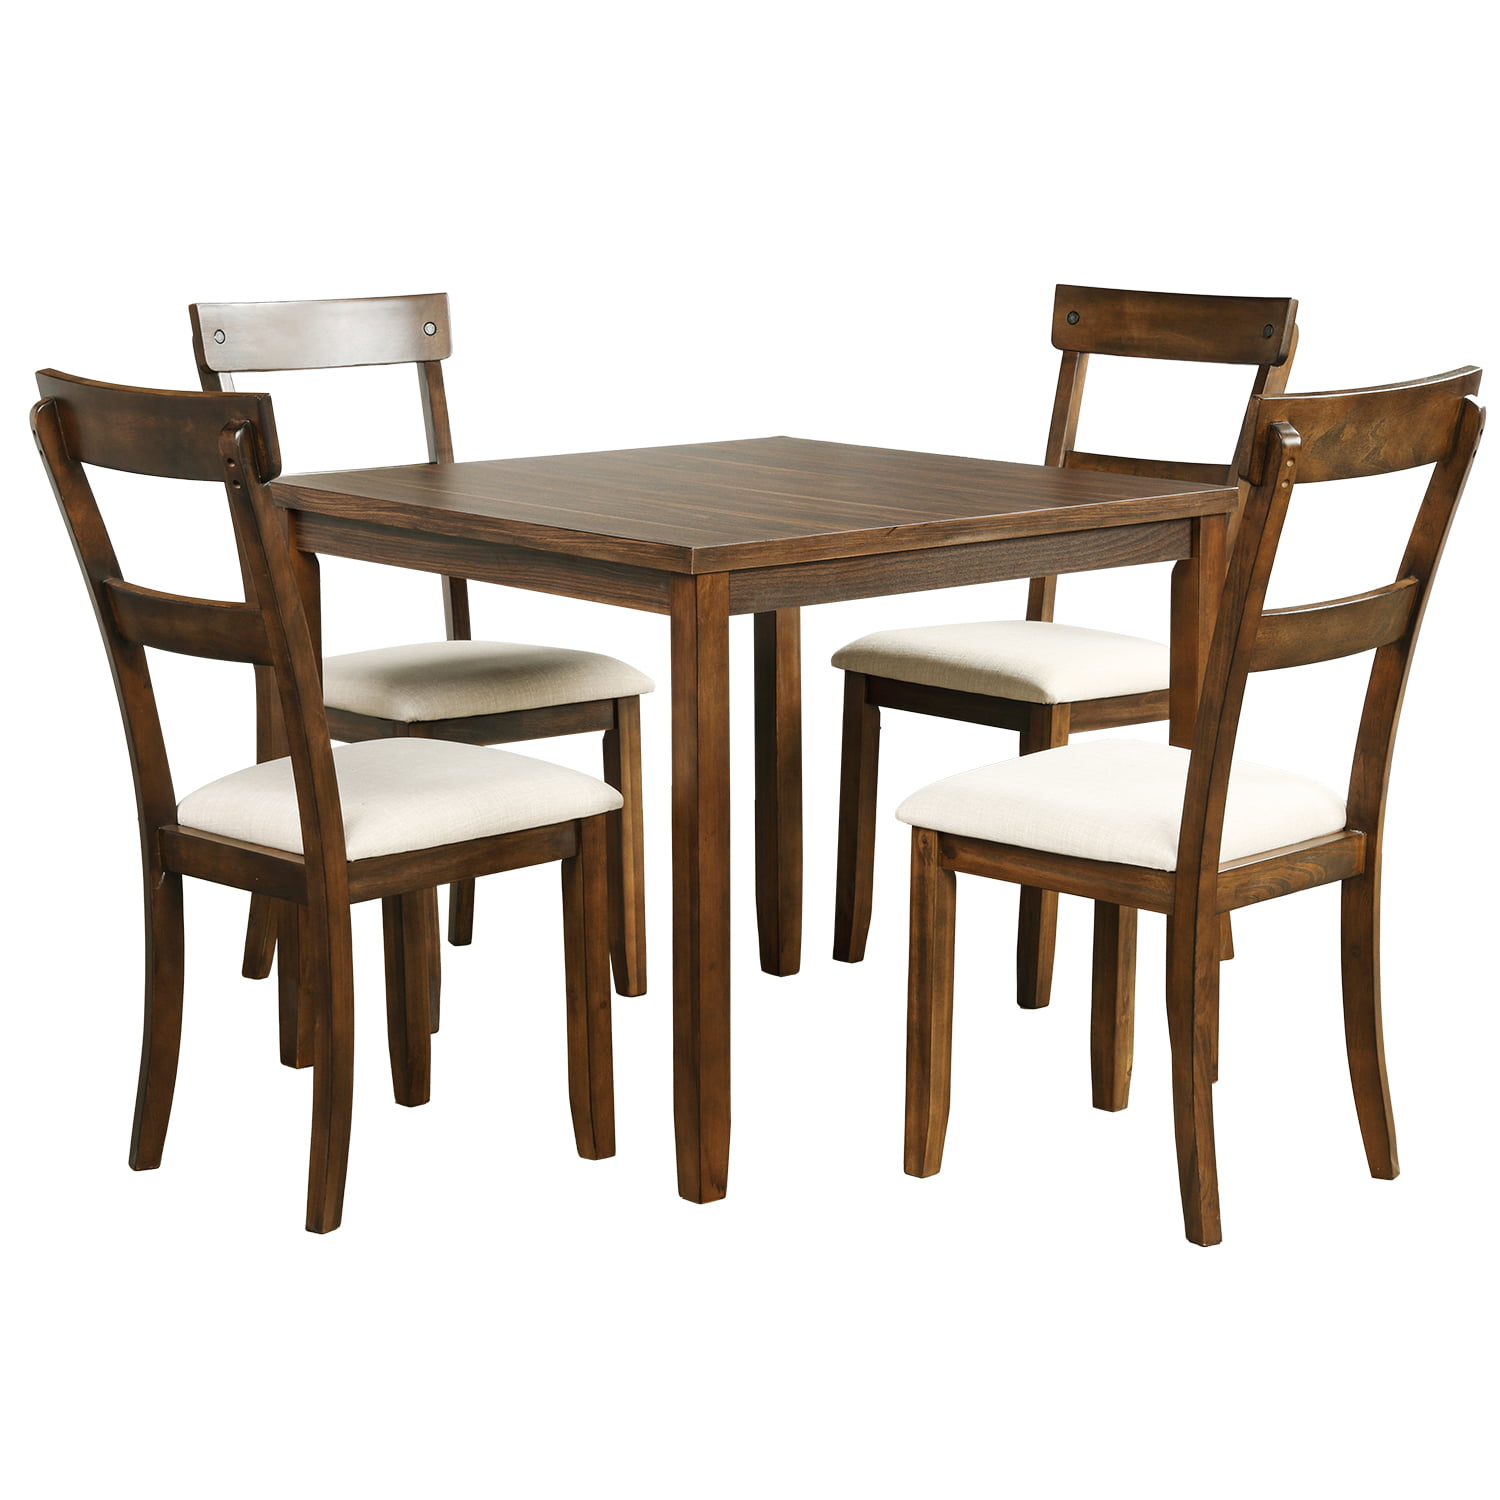 5 Piece Dining Table Set Industrial Wooden Kitchen Table And 4 Chairs For Dining Room American Walnut Walmartcom Walmartcom